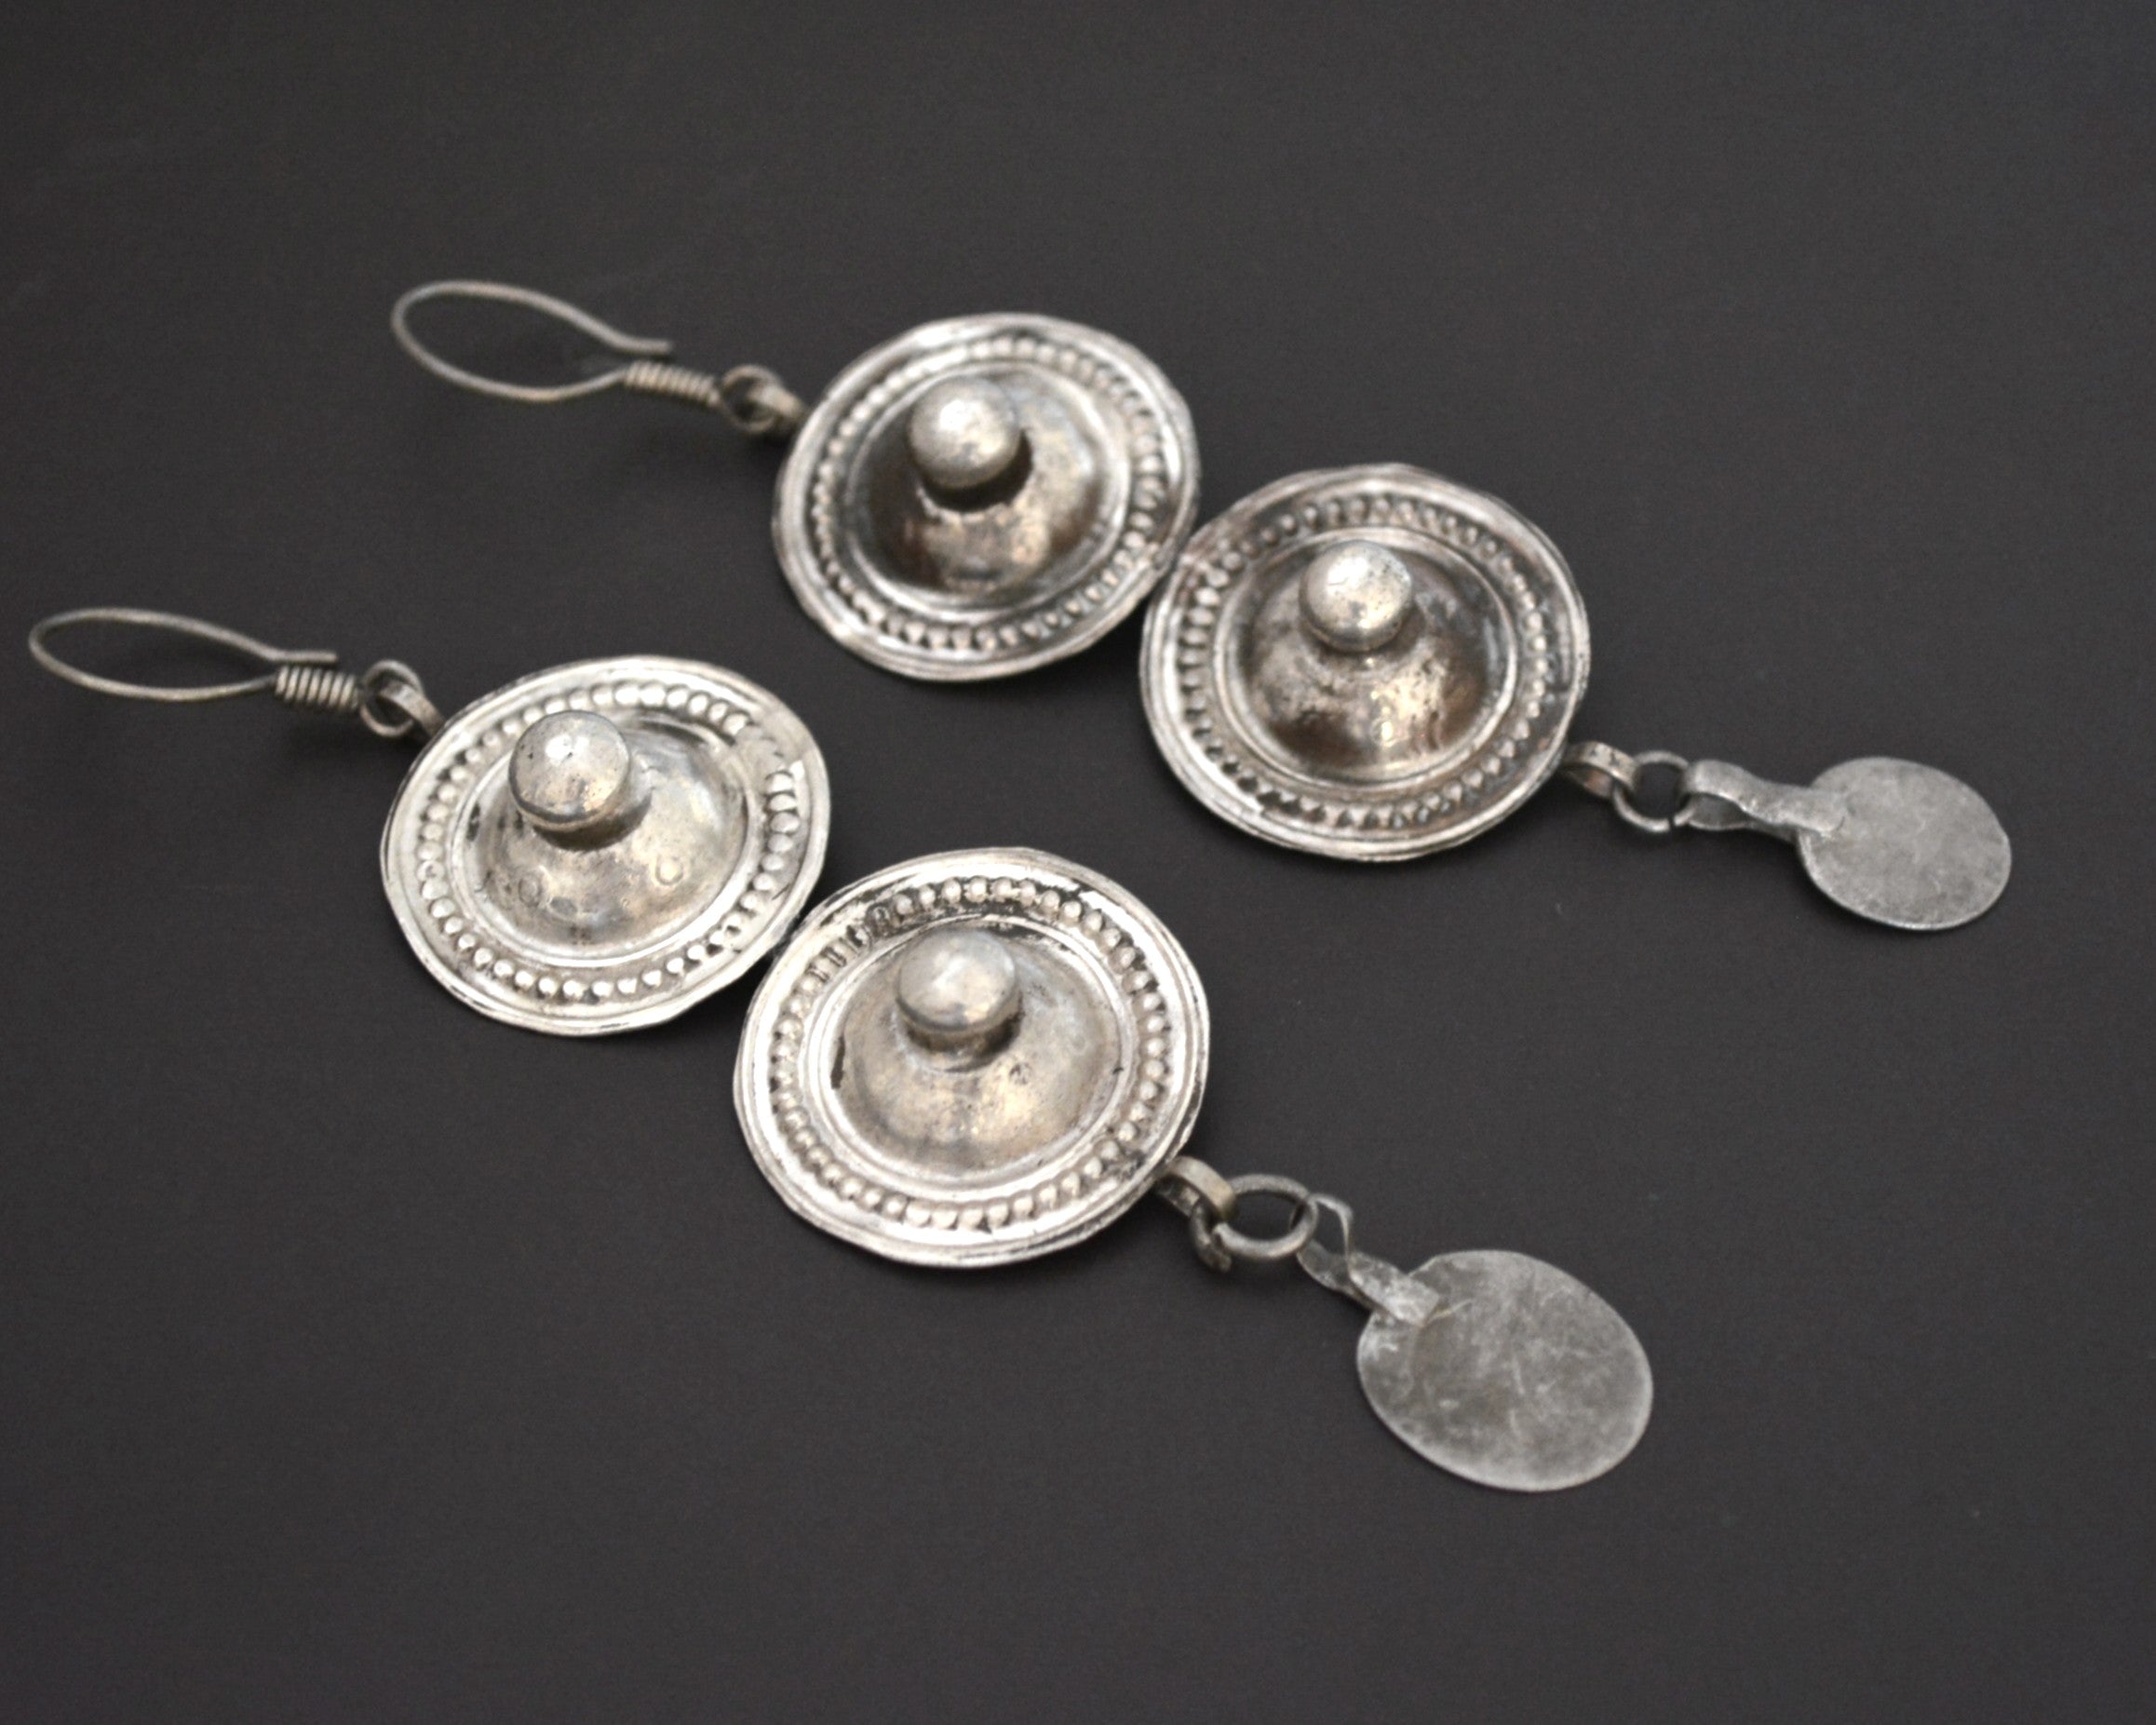 Large Afghani Silver Earrings with Dangles